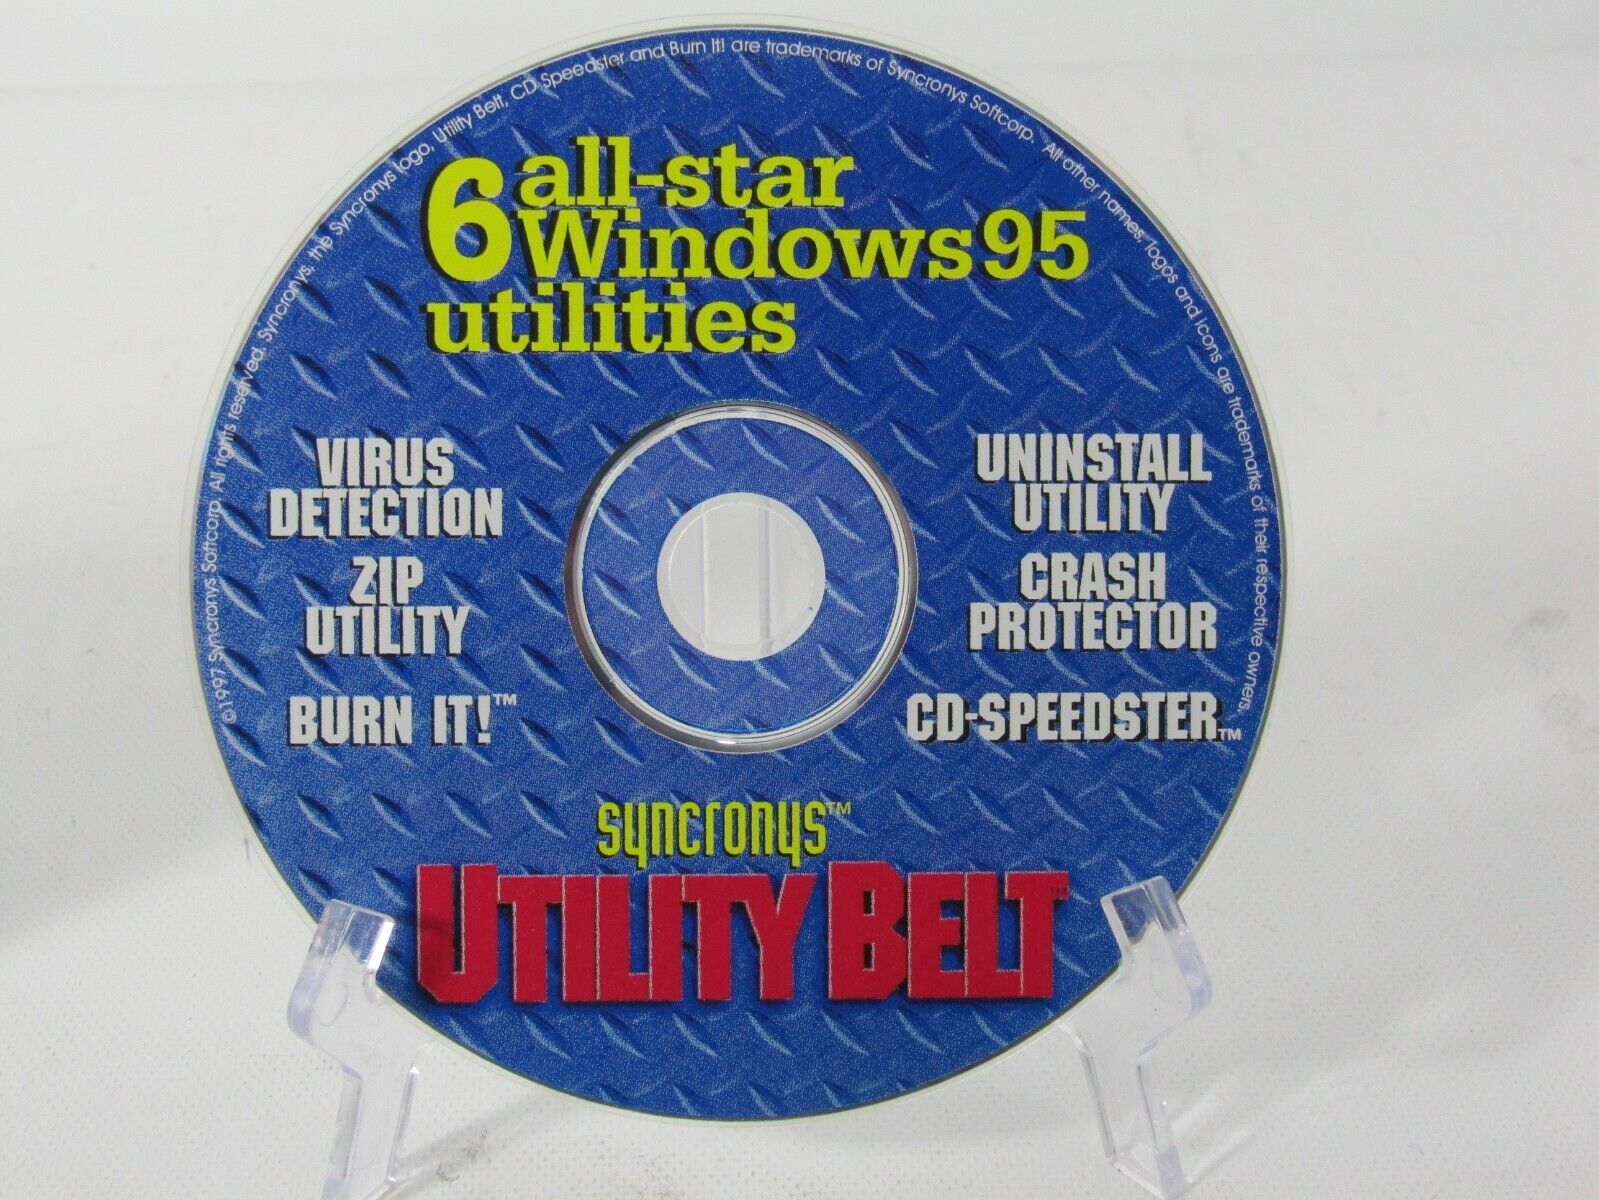  Syncronys 6 All-Star Utilities for Windows 95 PC CD-ROM - 